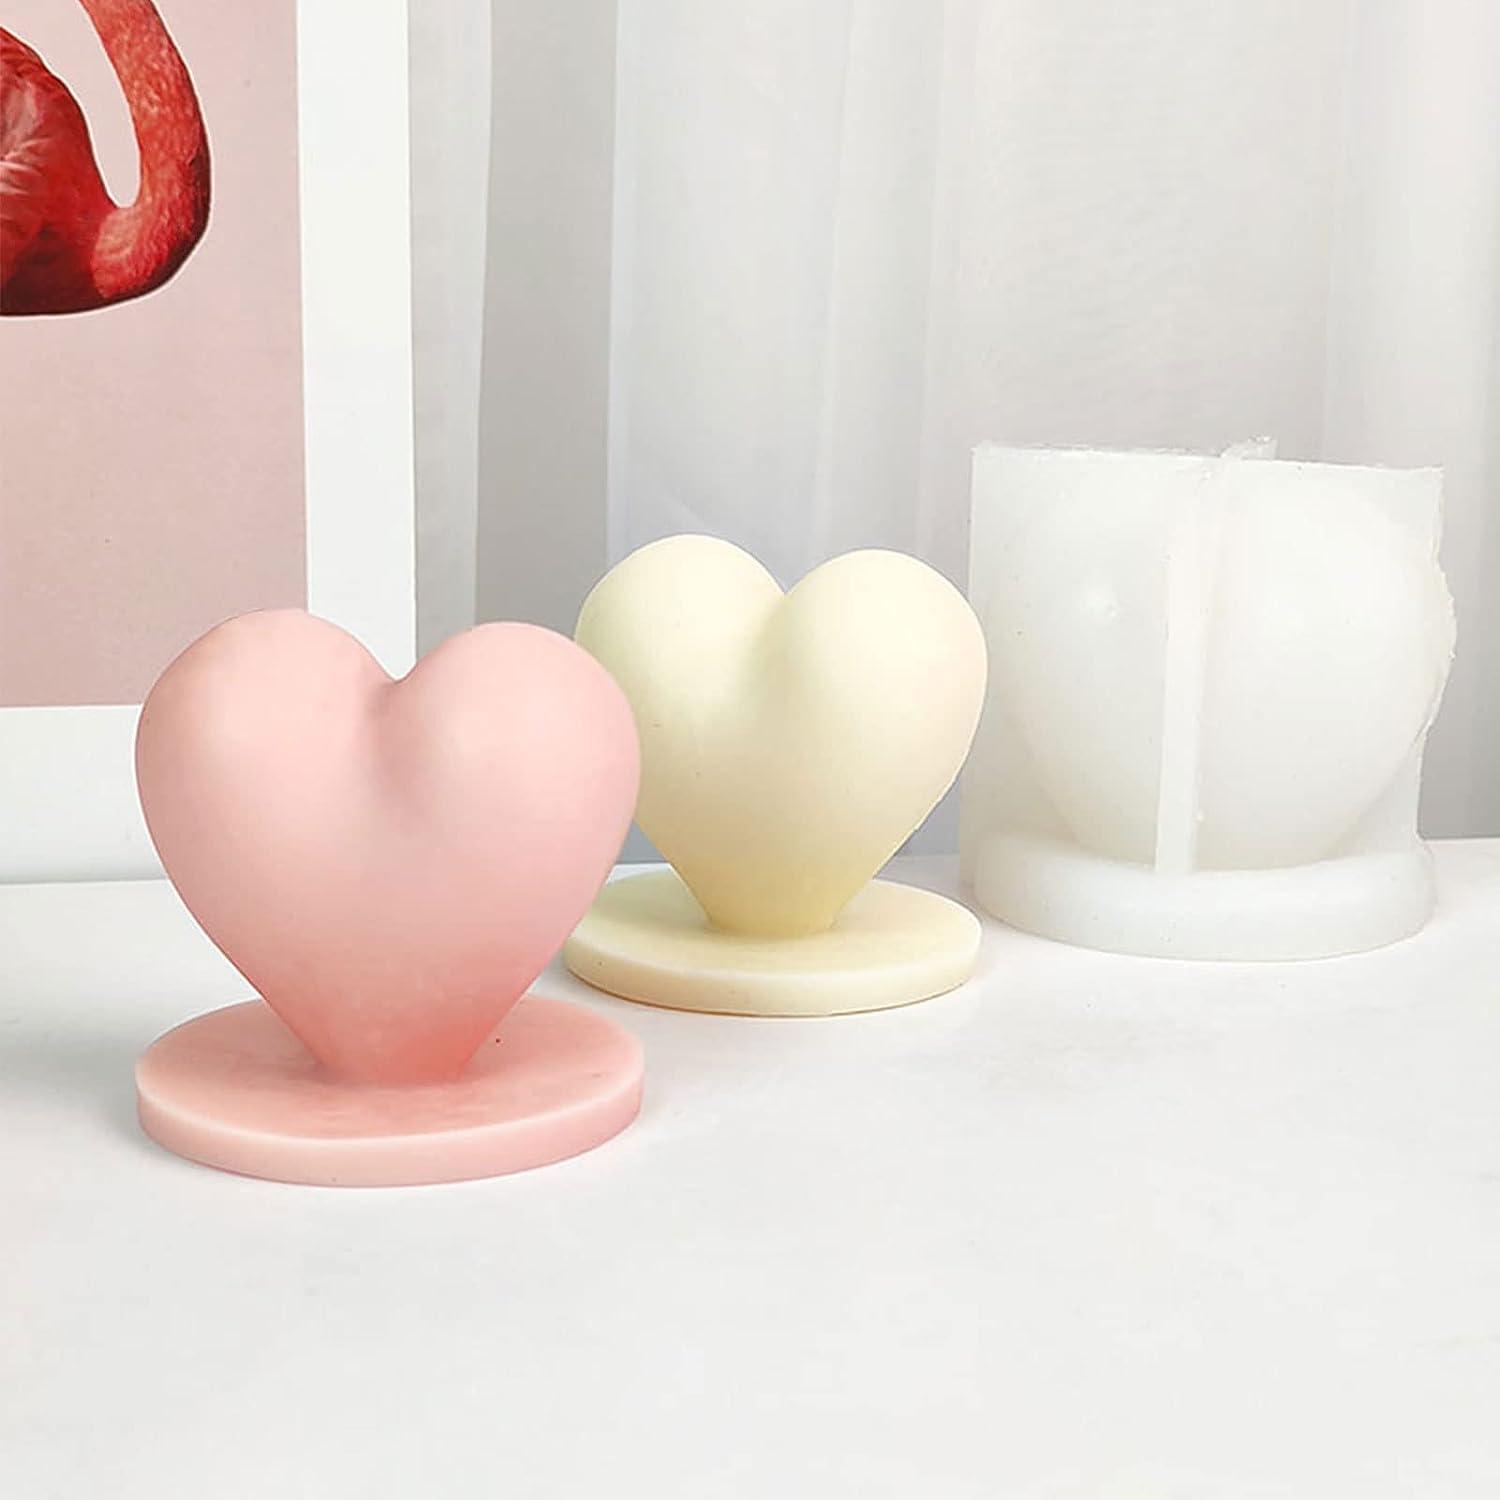 3D Double Love Silicone Candle Mold DIY Heart-shaped Candle Making